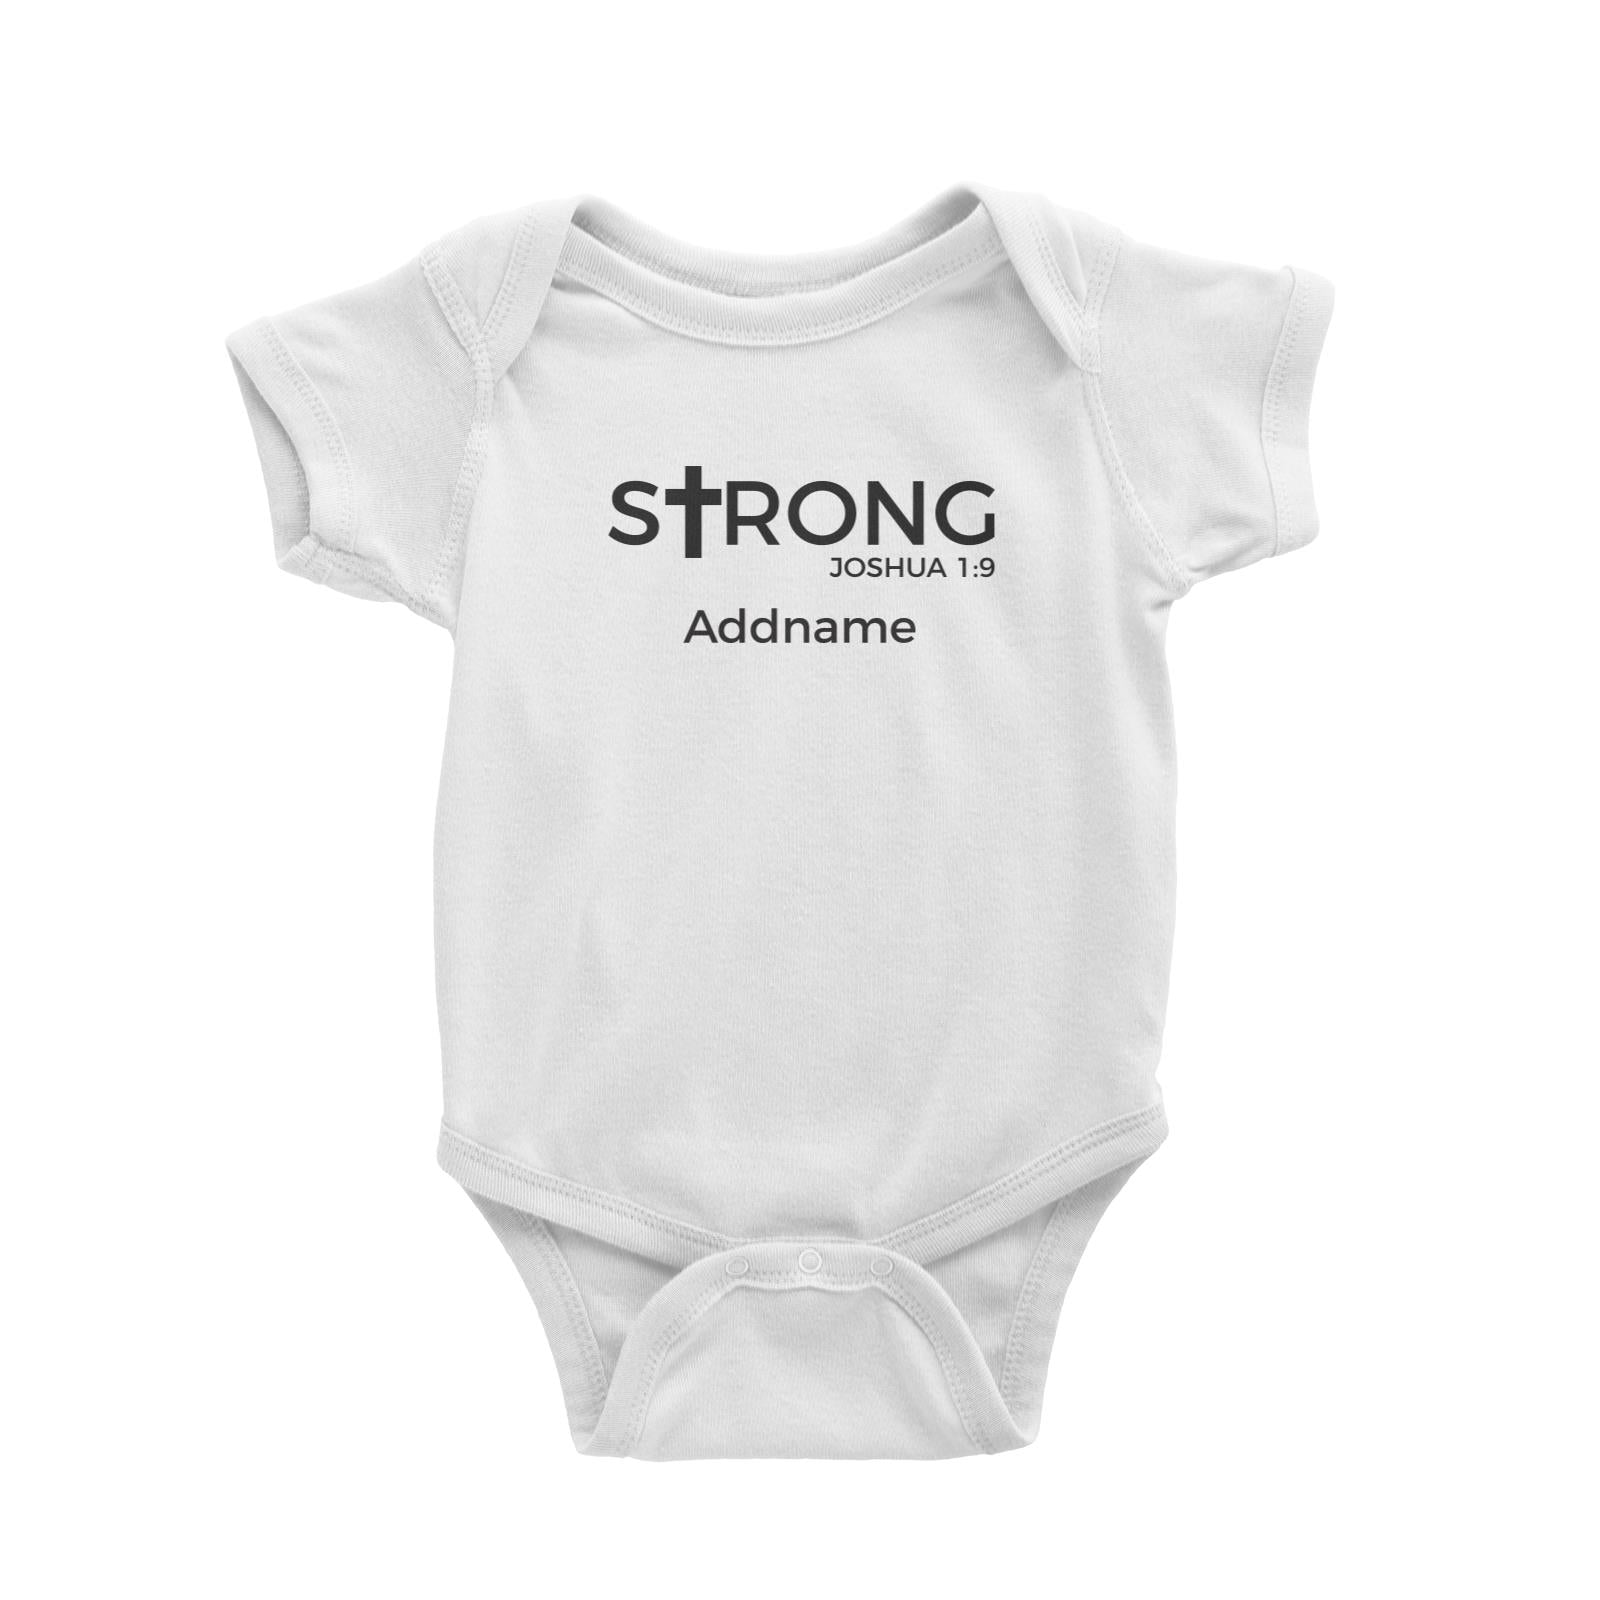 Christian Series Strong Joshua 1.9 Addname Baby Romper